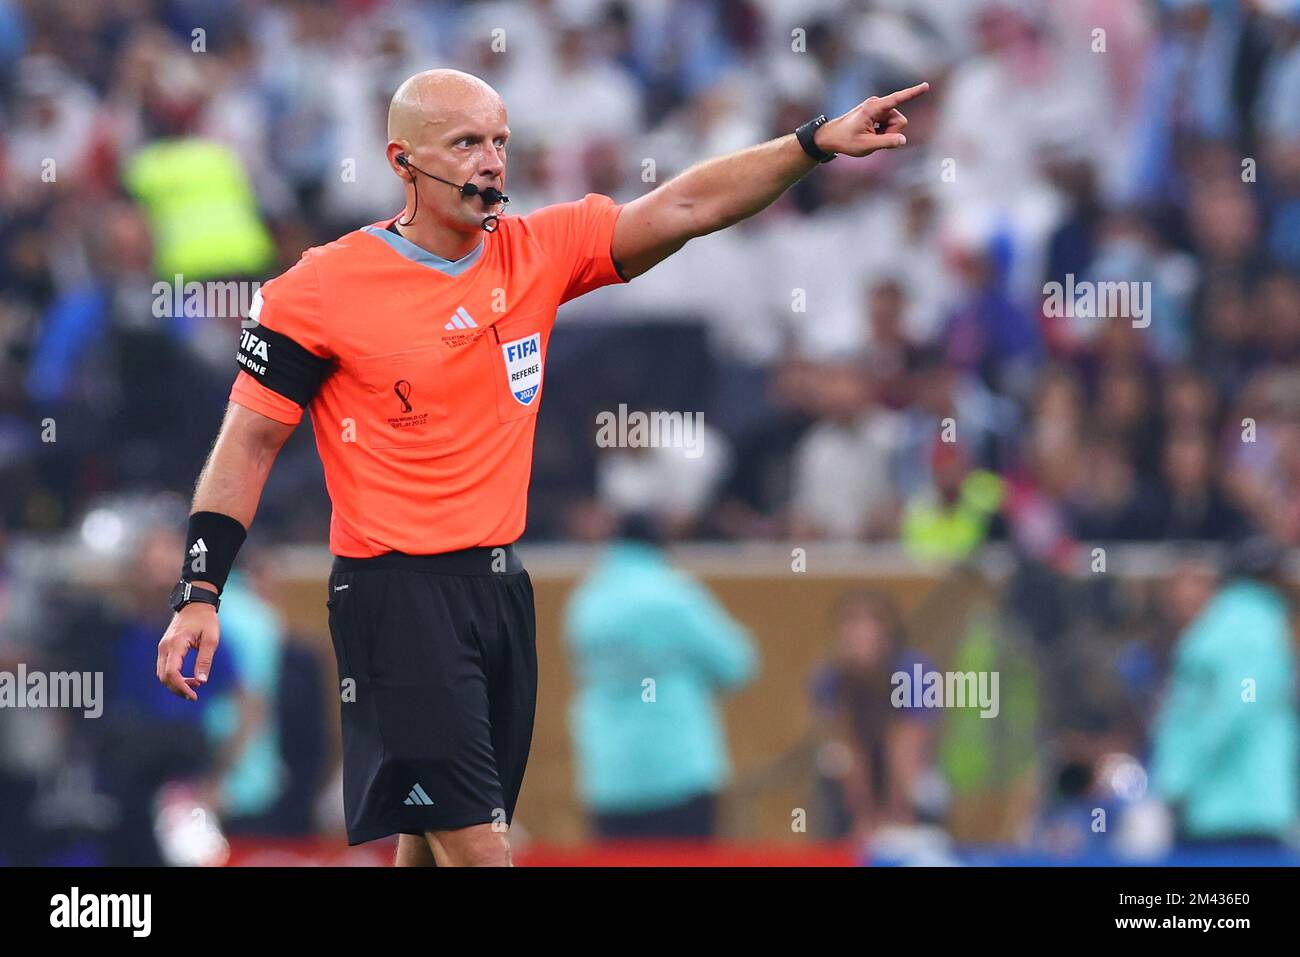 Lusail, Qatar. 18th Dec, 2022. Soccer, World Cup 2022 in Qatar, Argentina - France, Final, at Lusail Stadium, referee Szymon Marciniak is in charge of the match. Credit: Tom Weller/dpa/Alamy Live News Stock Photo